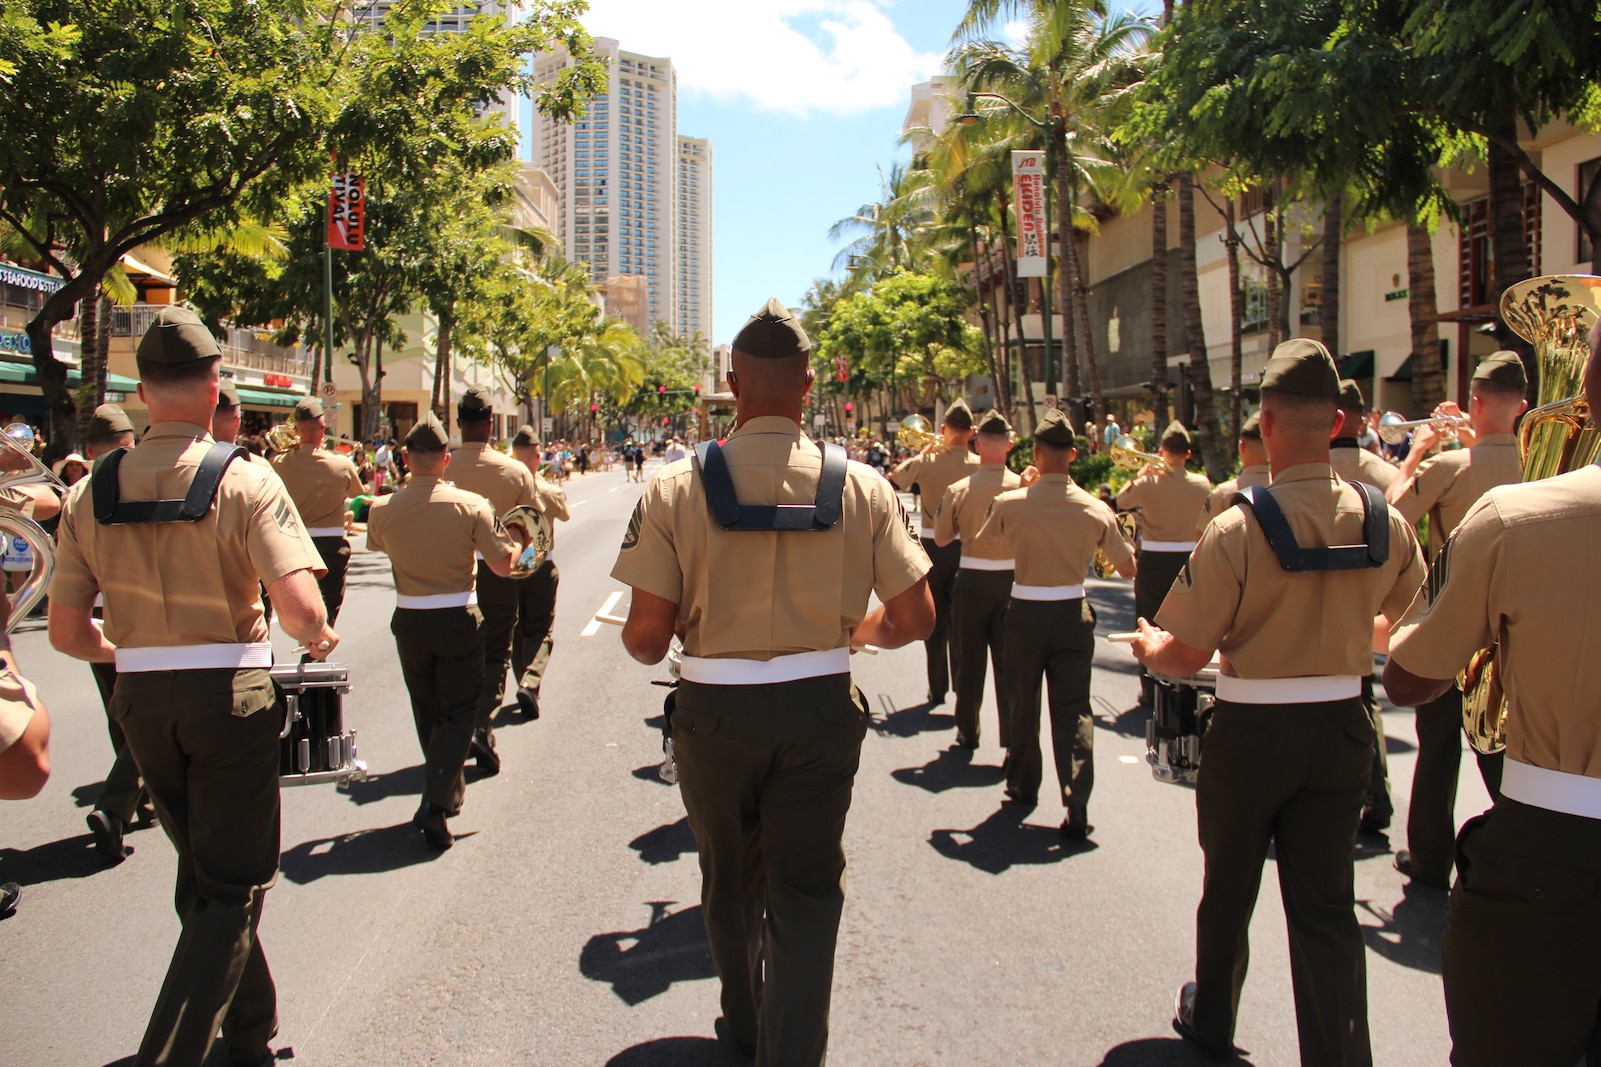 A view from behind the Field Band, as they march through Honolulu.